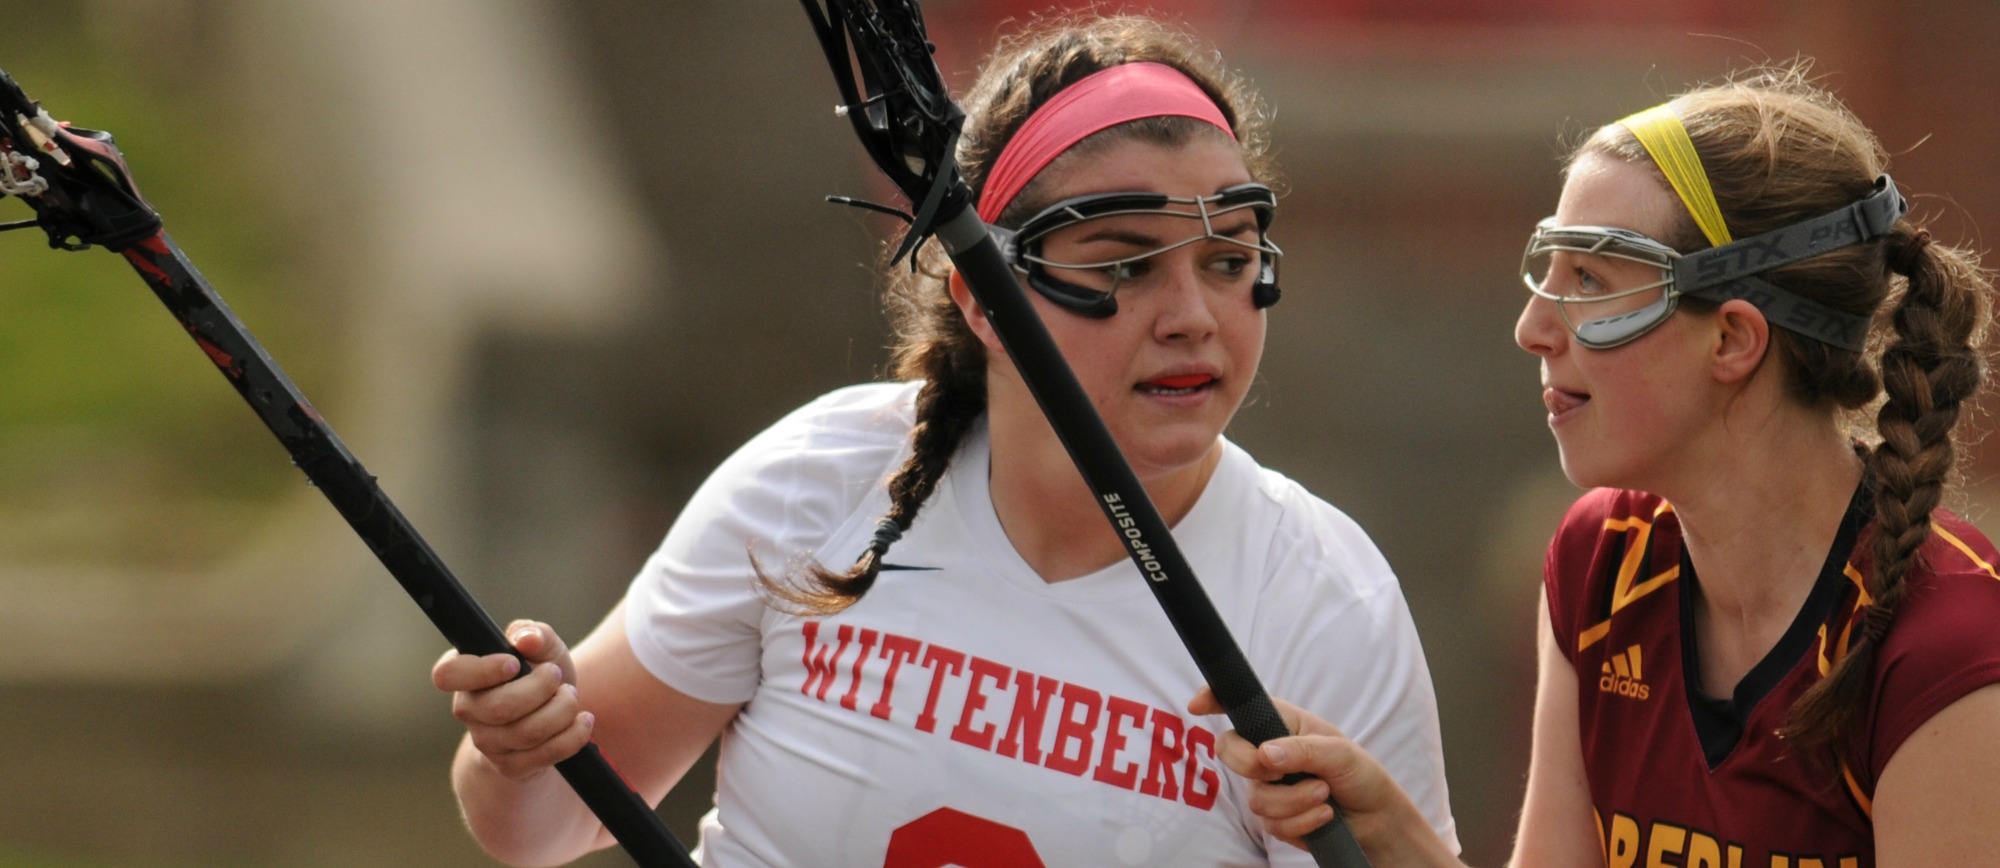 Women's Lacrosse Improves to 7-1 with Win Over Capital, 12-10